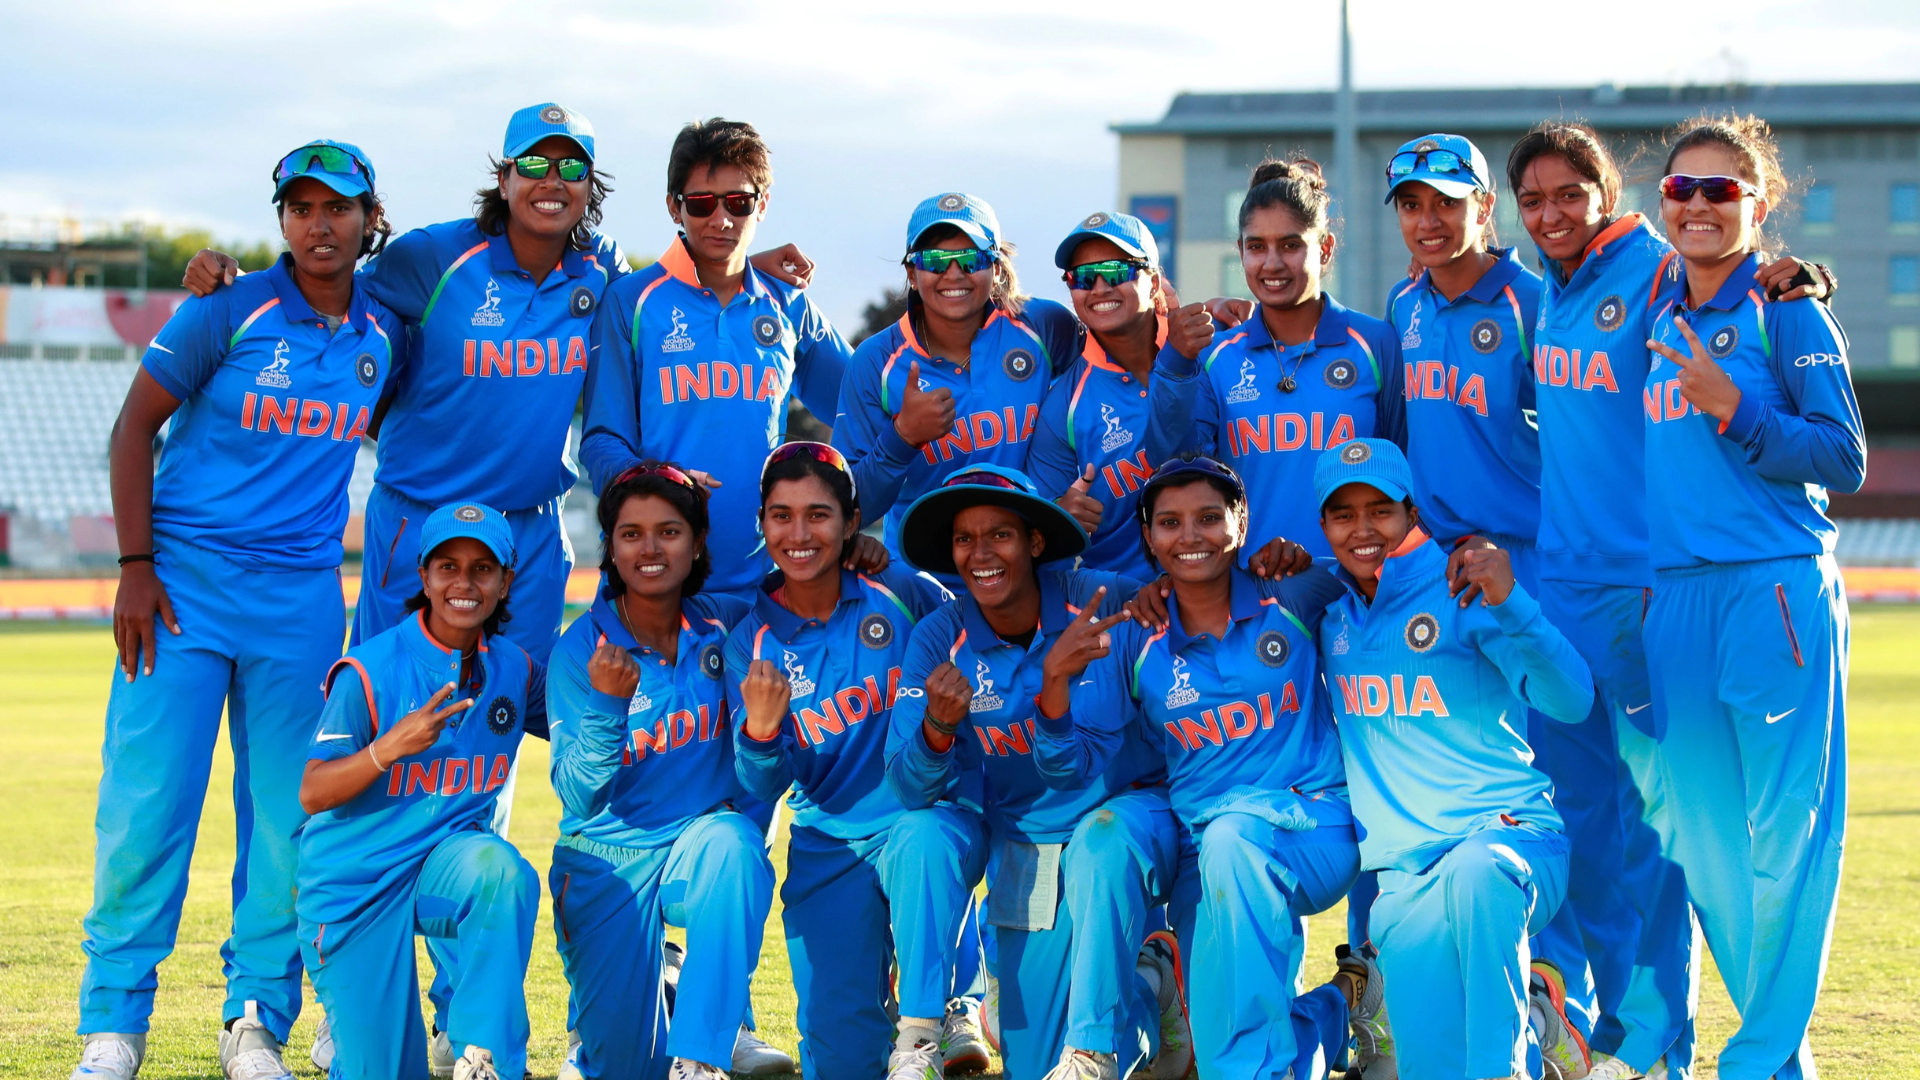 India’s Dominance Continues: Women’s Team Cruises Past UAE In Asia Cup Victory